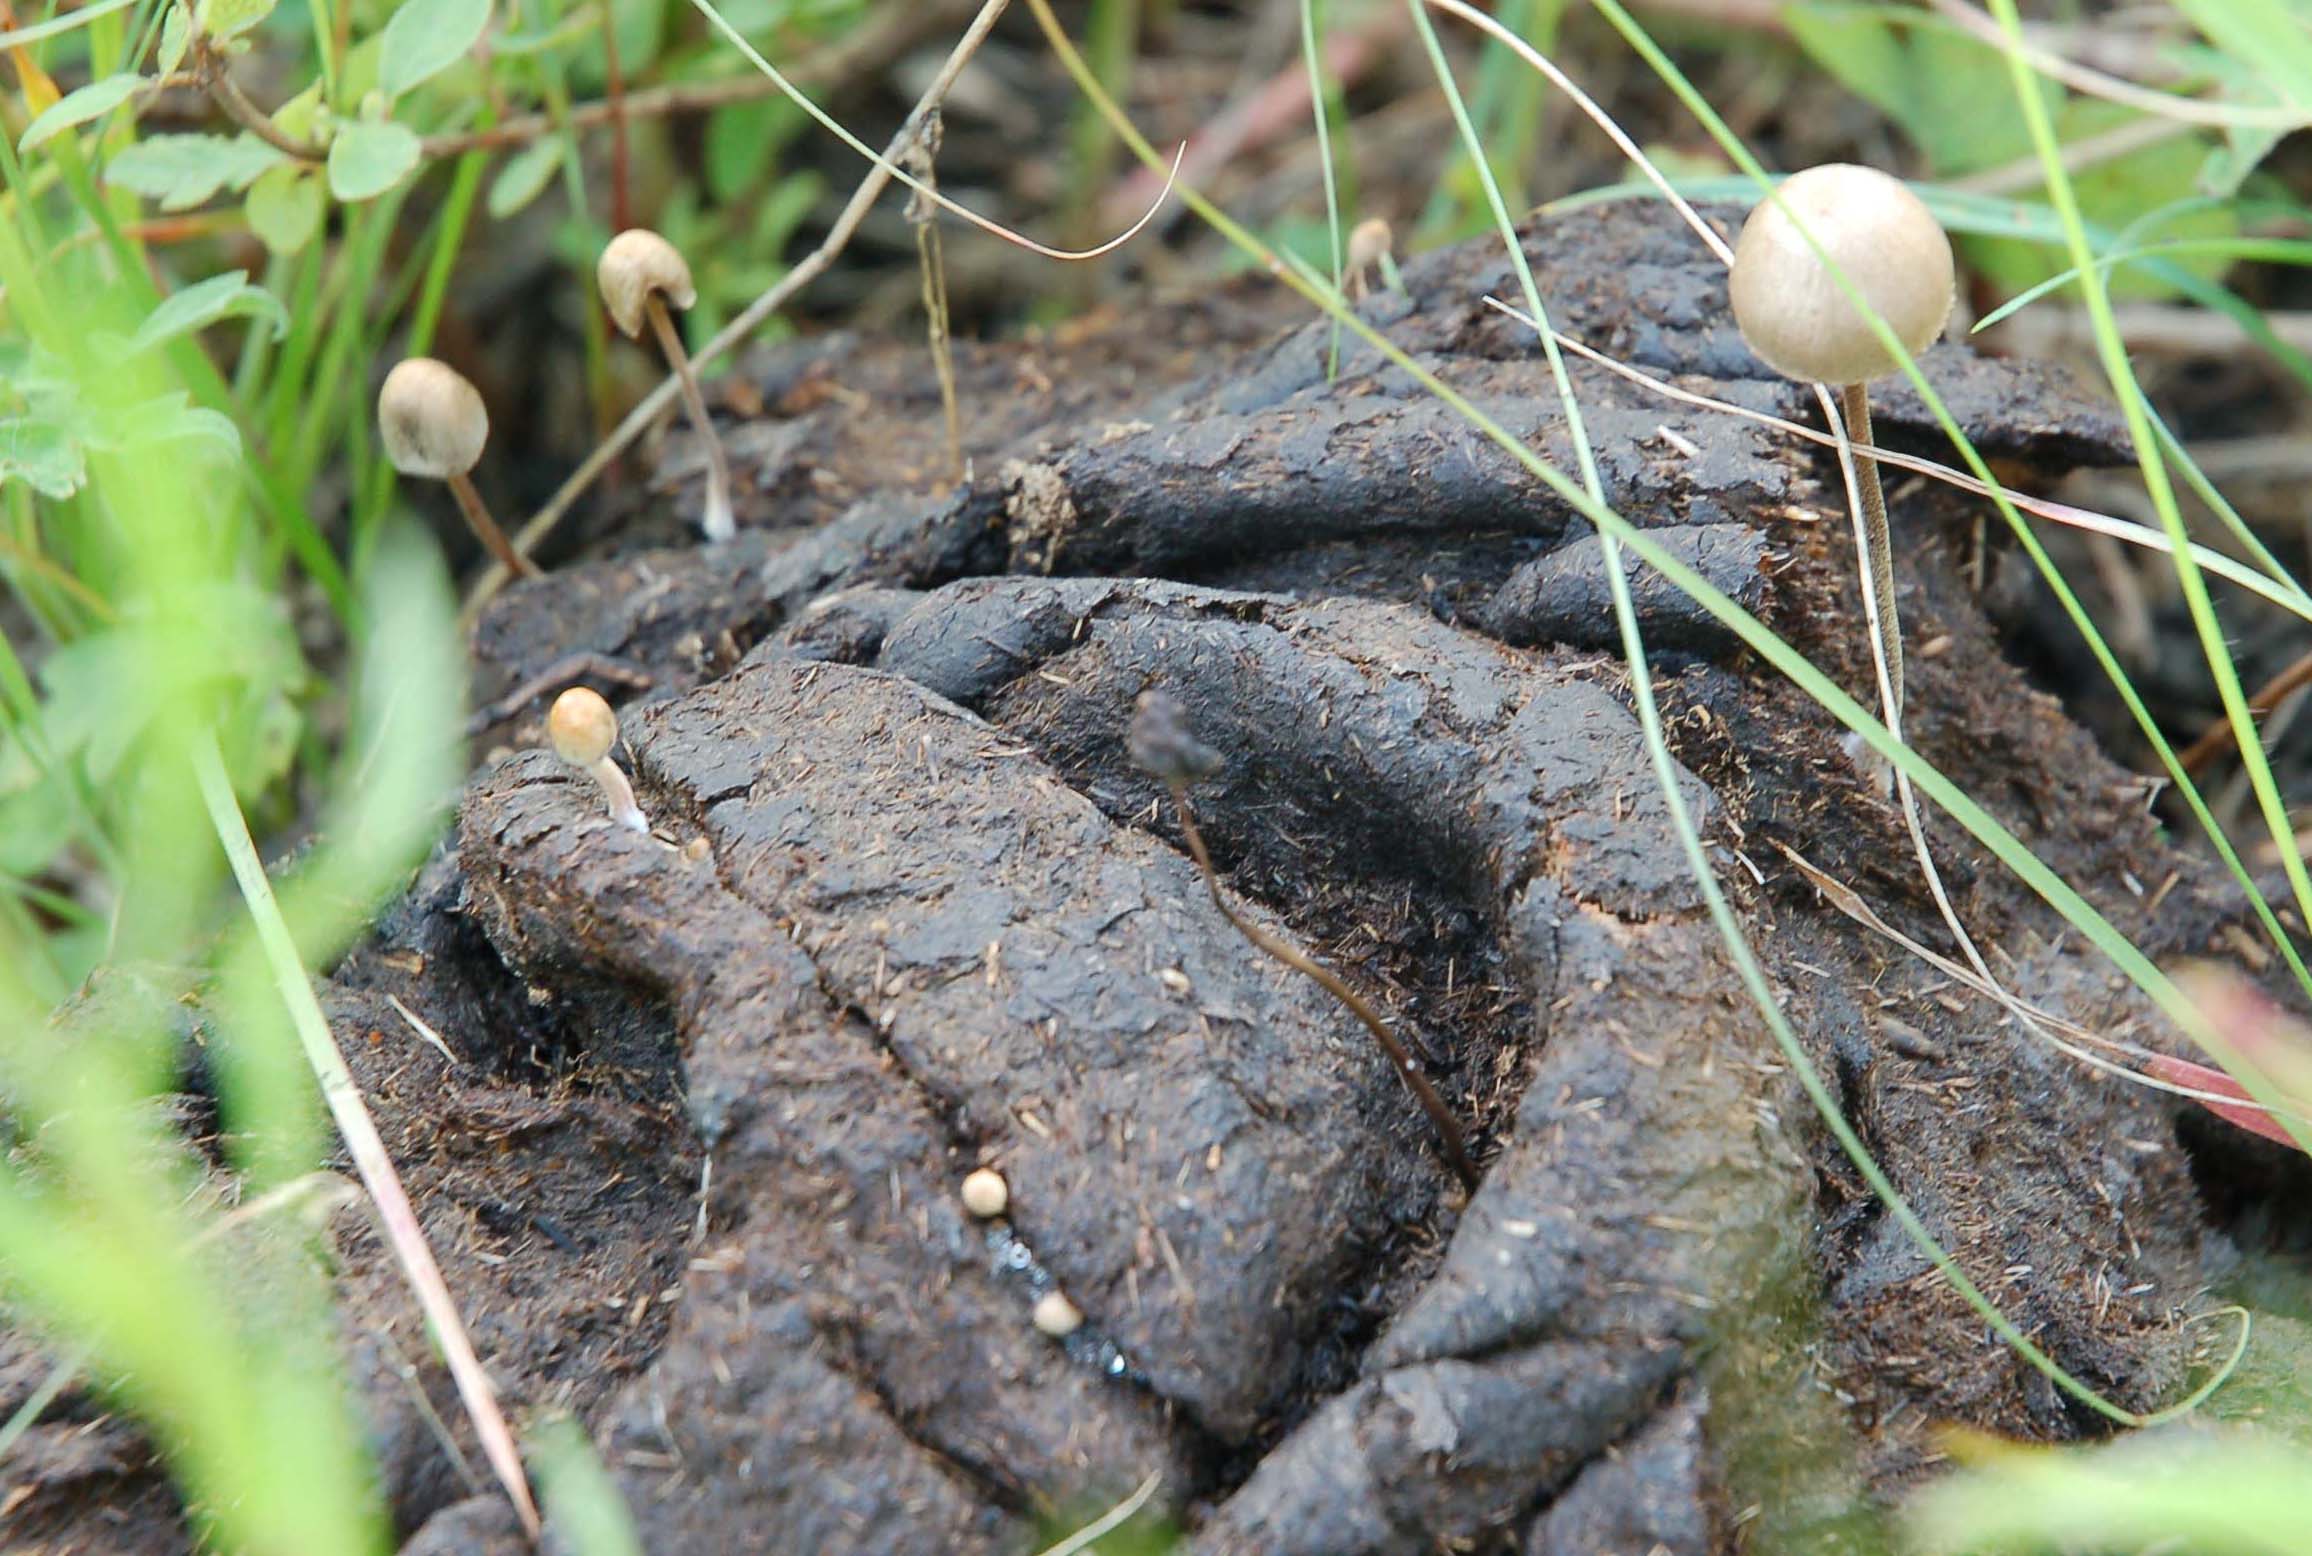  fungi from Bison dung 